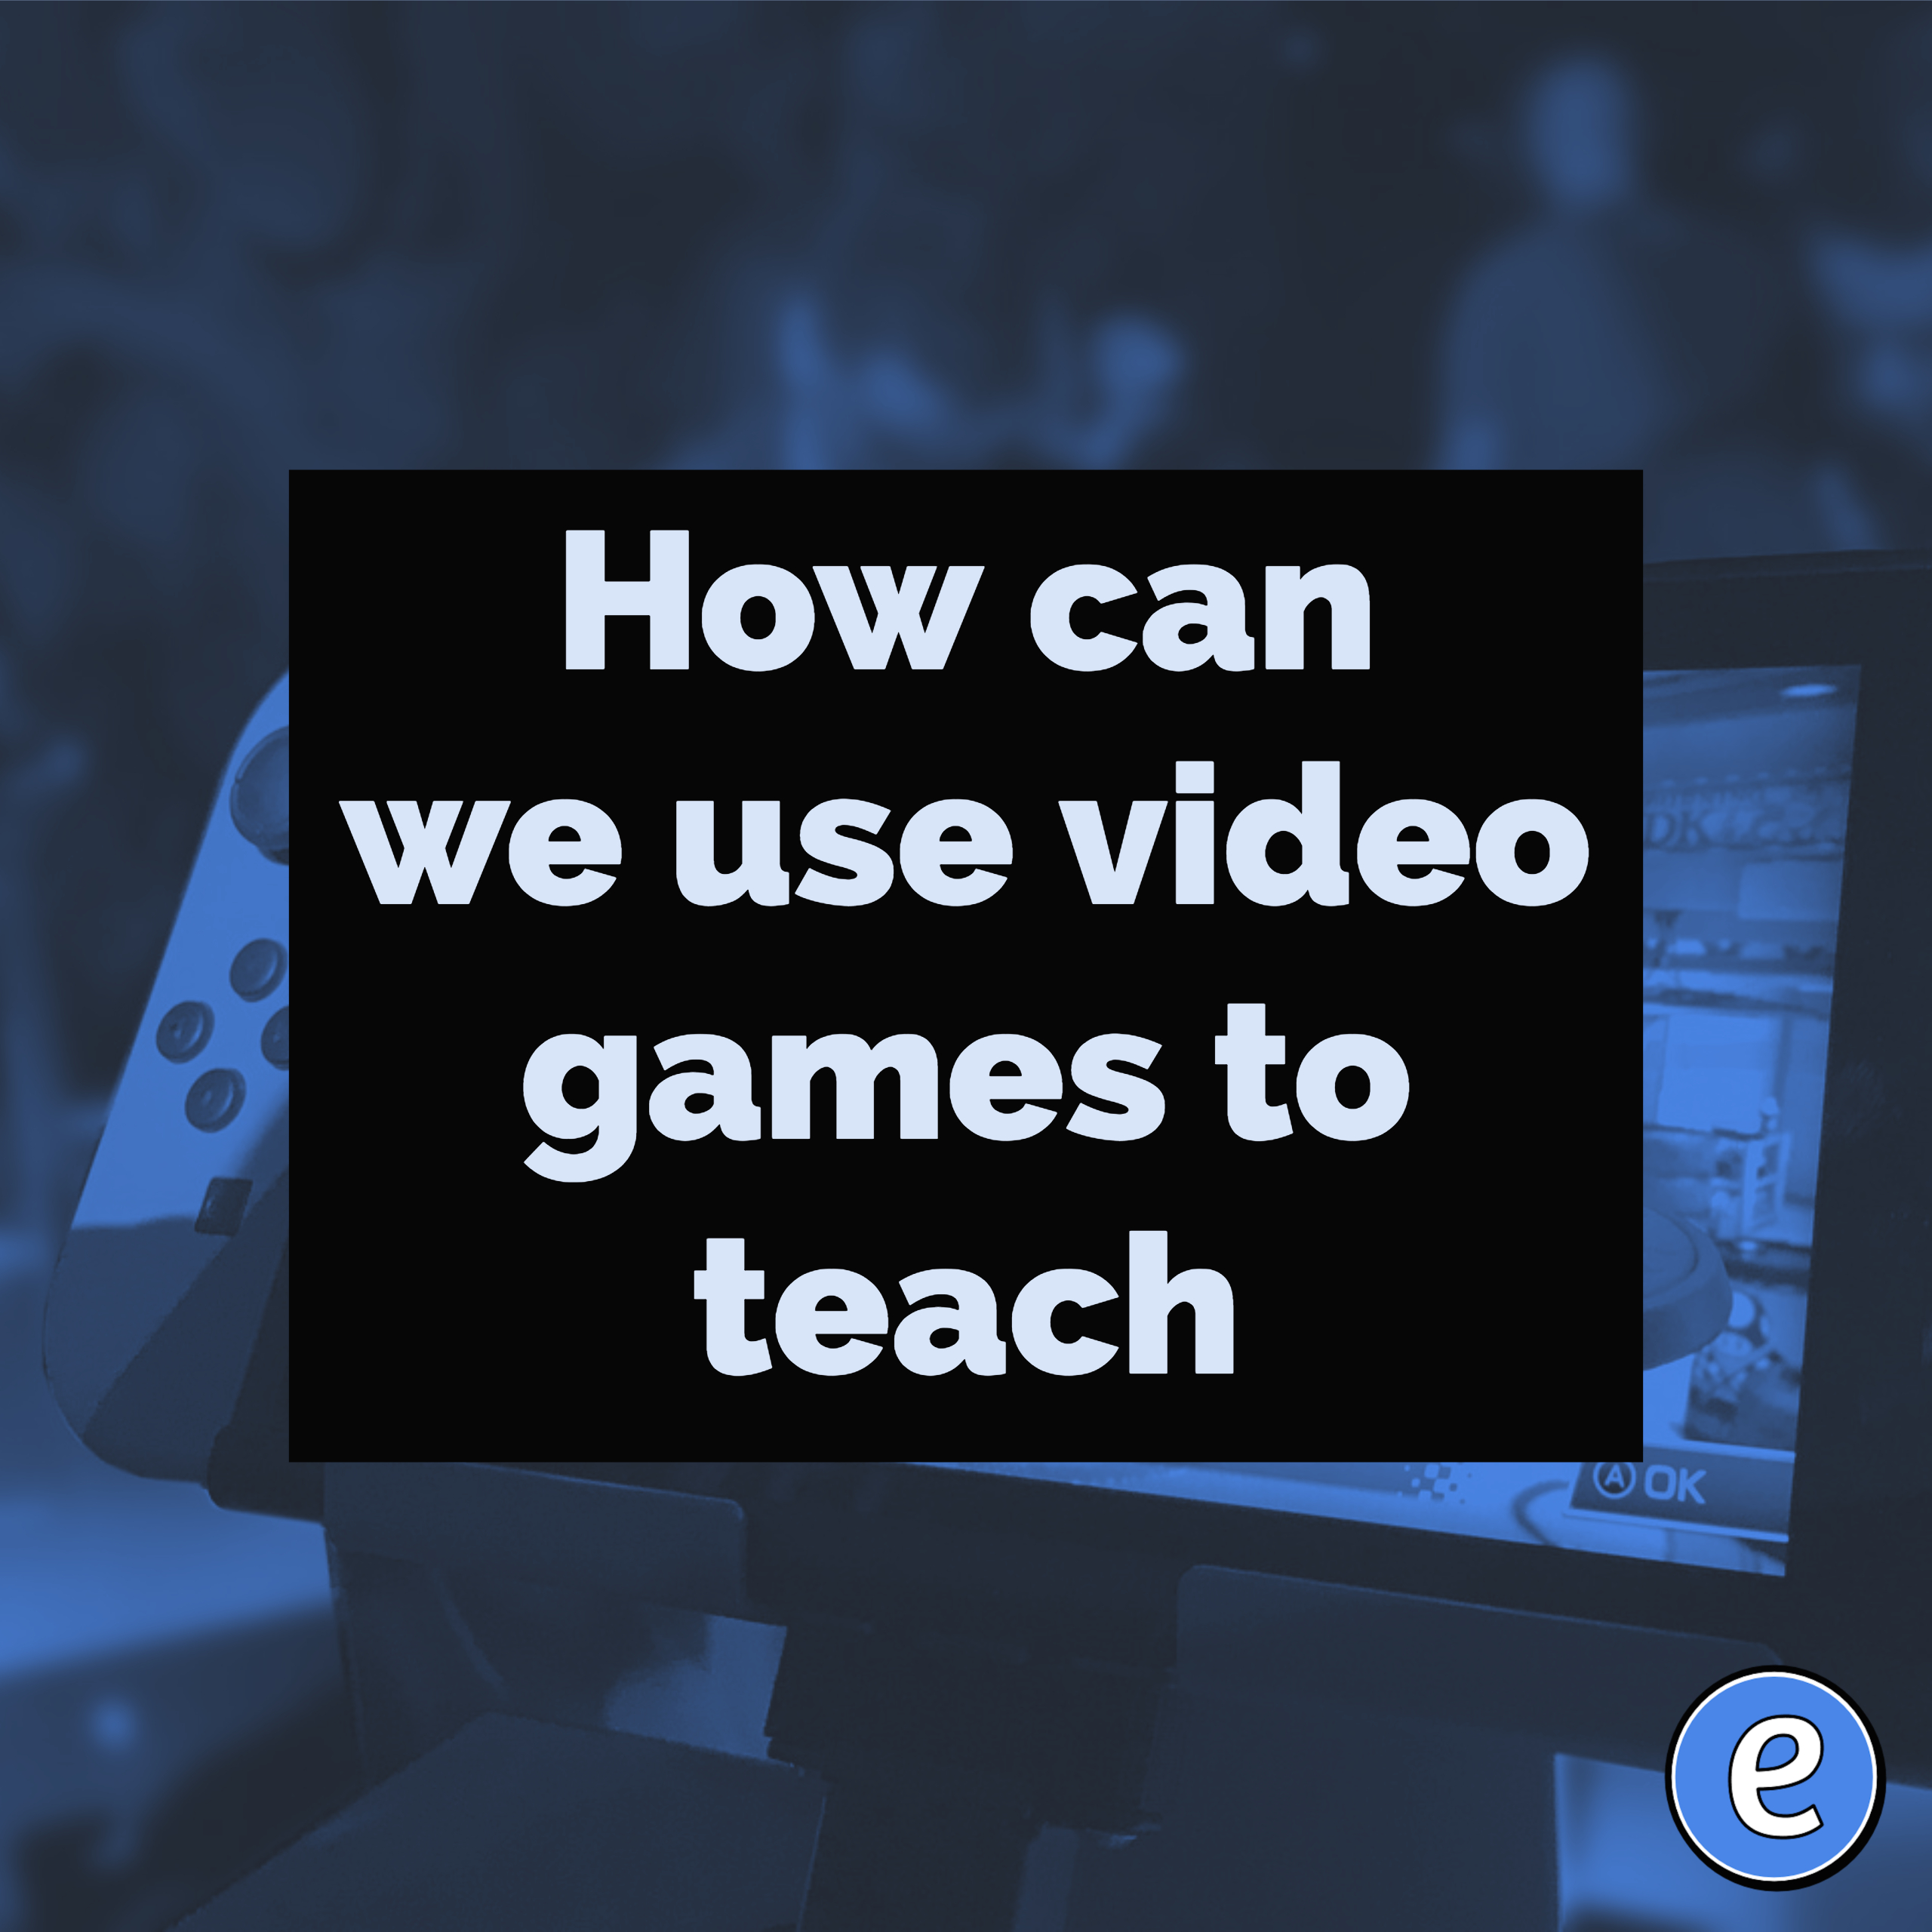 How can we use video games to teach?